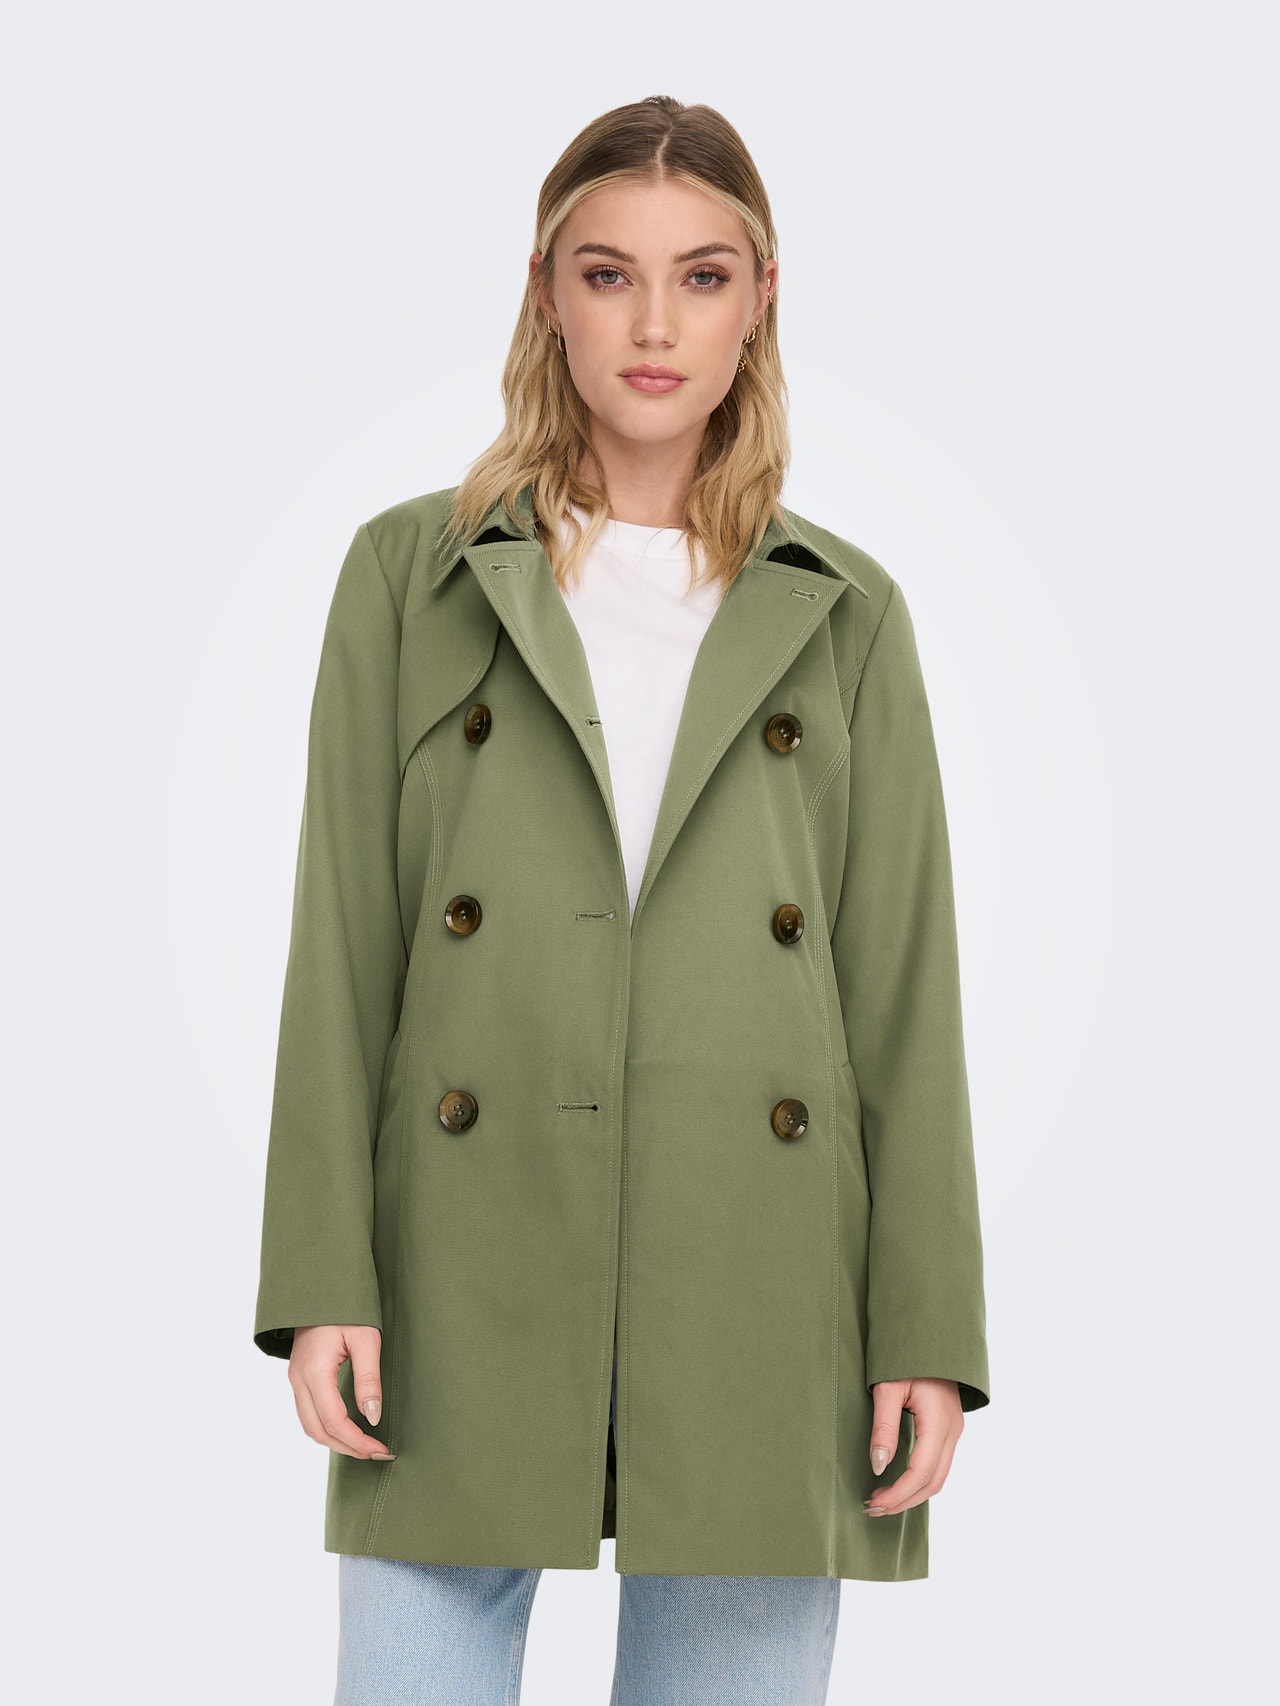 Short ONLY® Medium | solid color Green Trenchcoat |